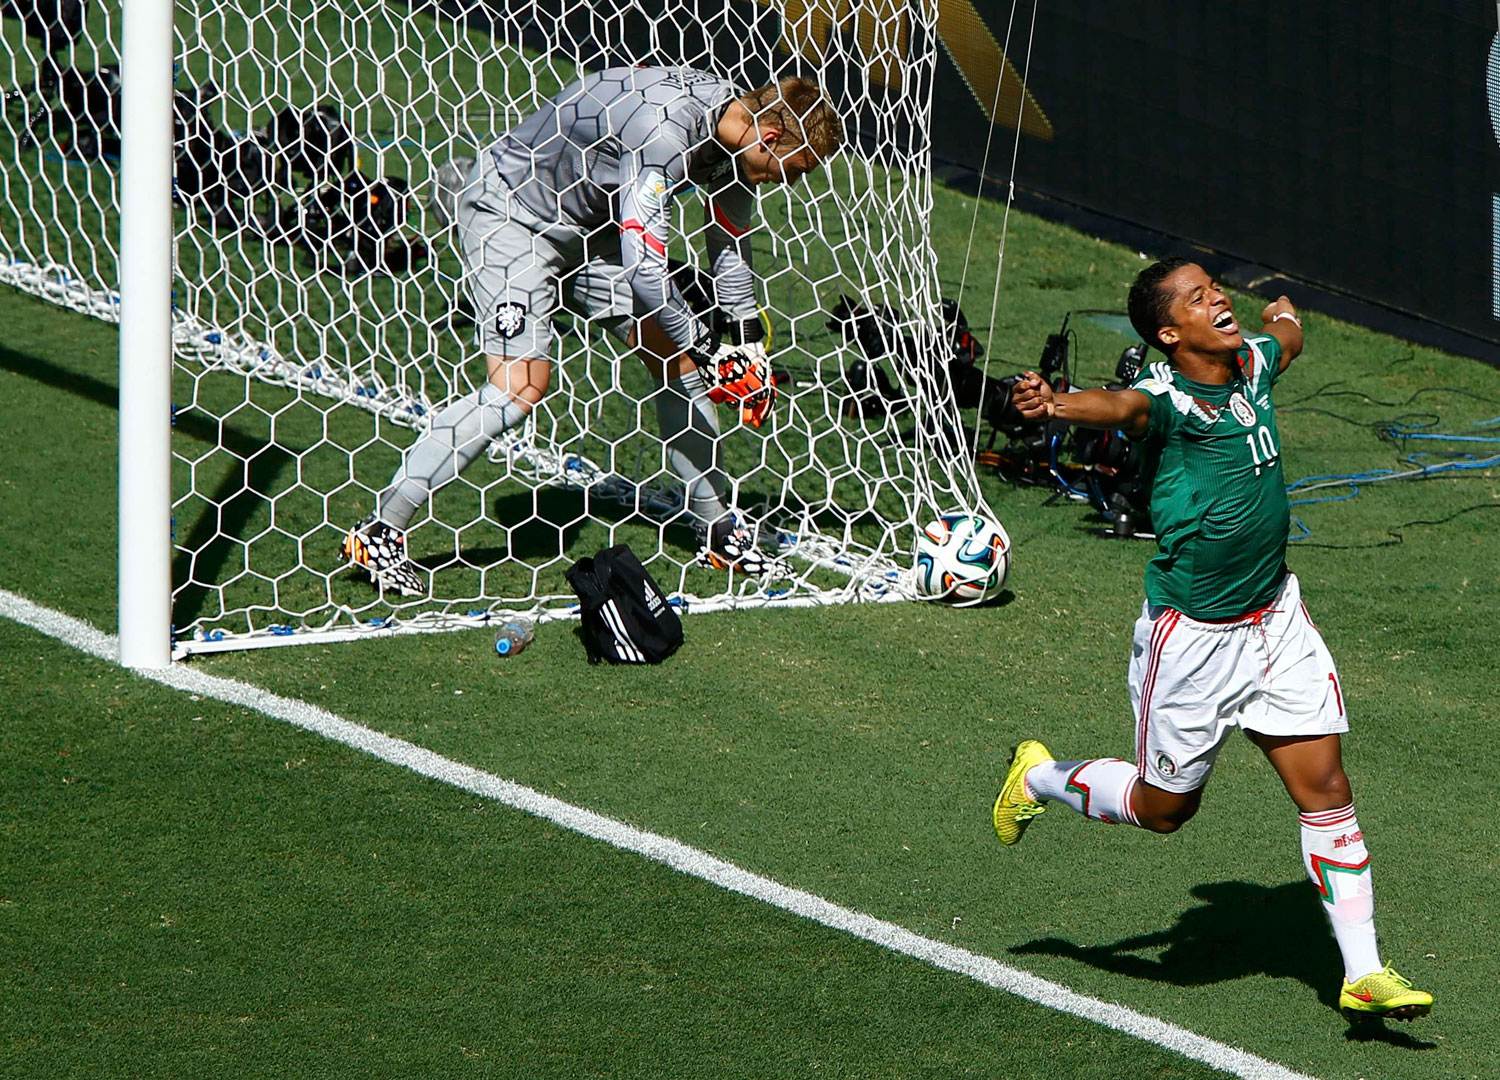 Jasper Cillessen of the Netherlands picks the ball out of the net as Mexico's Giovani Dos Santos celebrates his goal during their game at the Castelao arena in Fortaleza , Brazil on June 29, 2014.